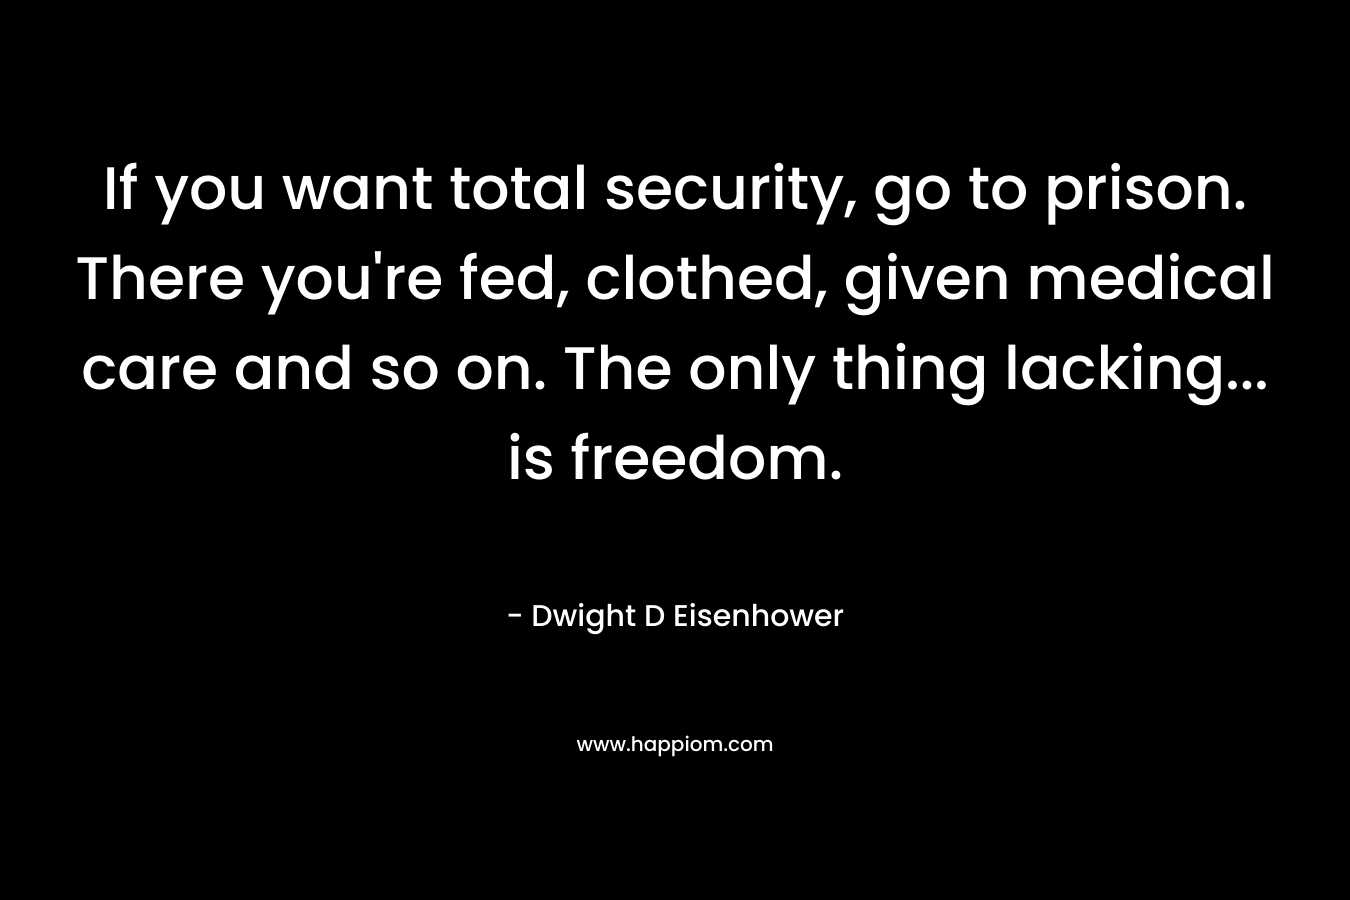 If you want total security, go to prison. There you're fed, clothed, given medical care and so on. The only thing lacking... is freedom. 